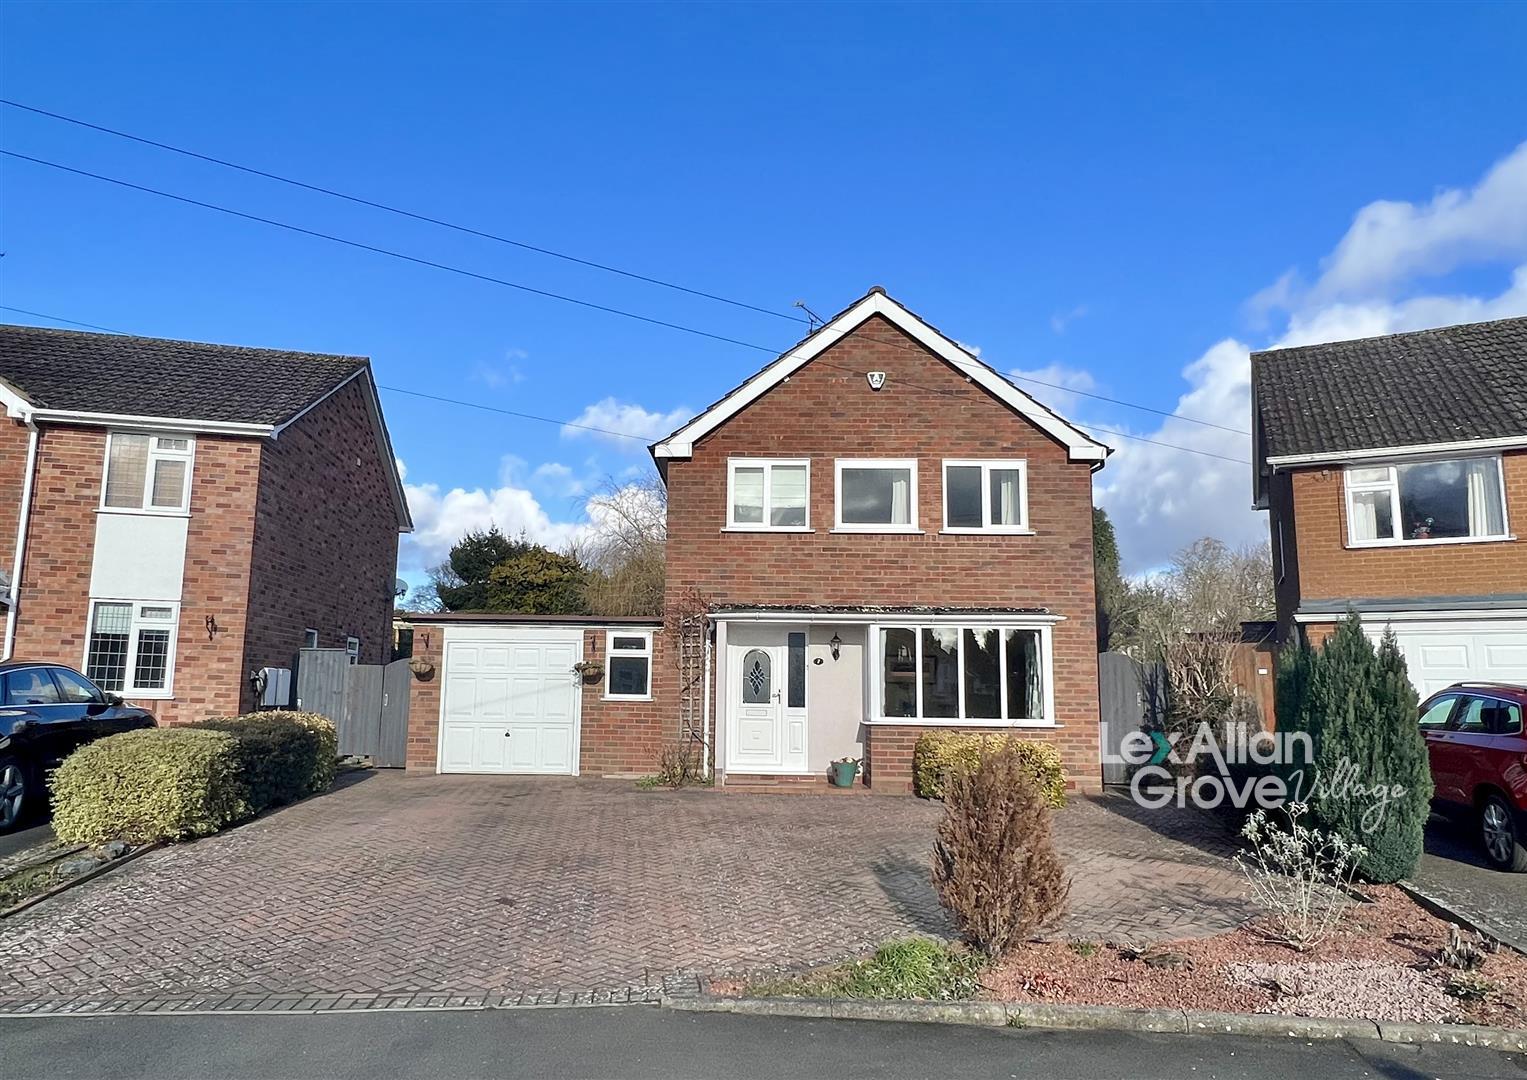 3 bed detached house for sale in Lodge Crescent, Stourbridge - Property Image 1